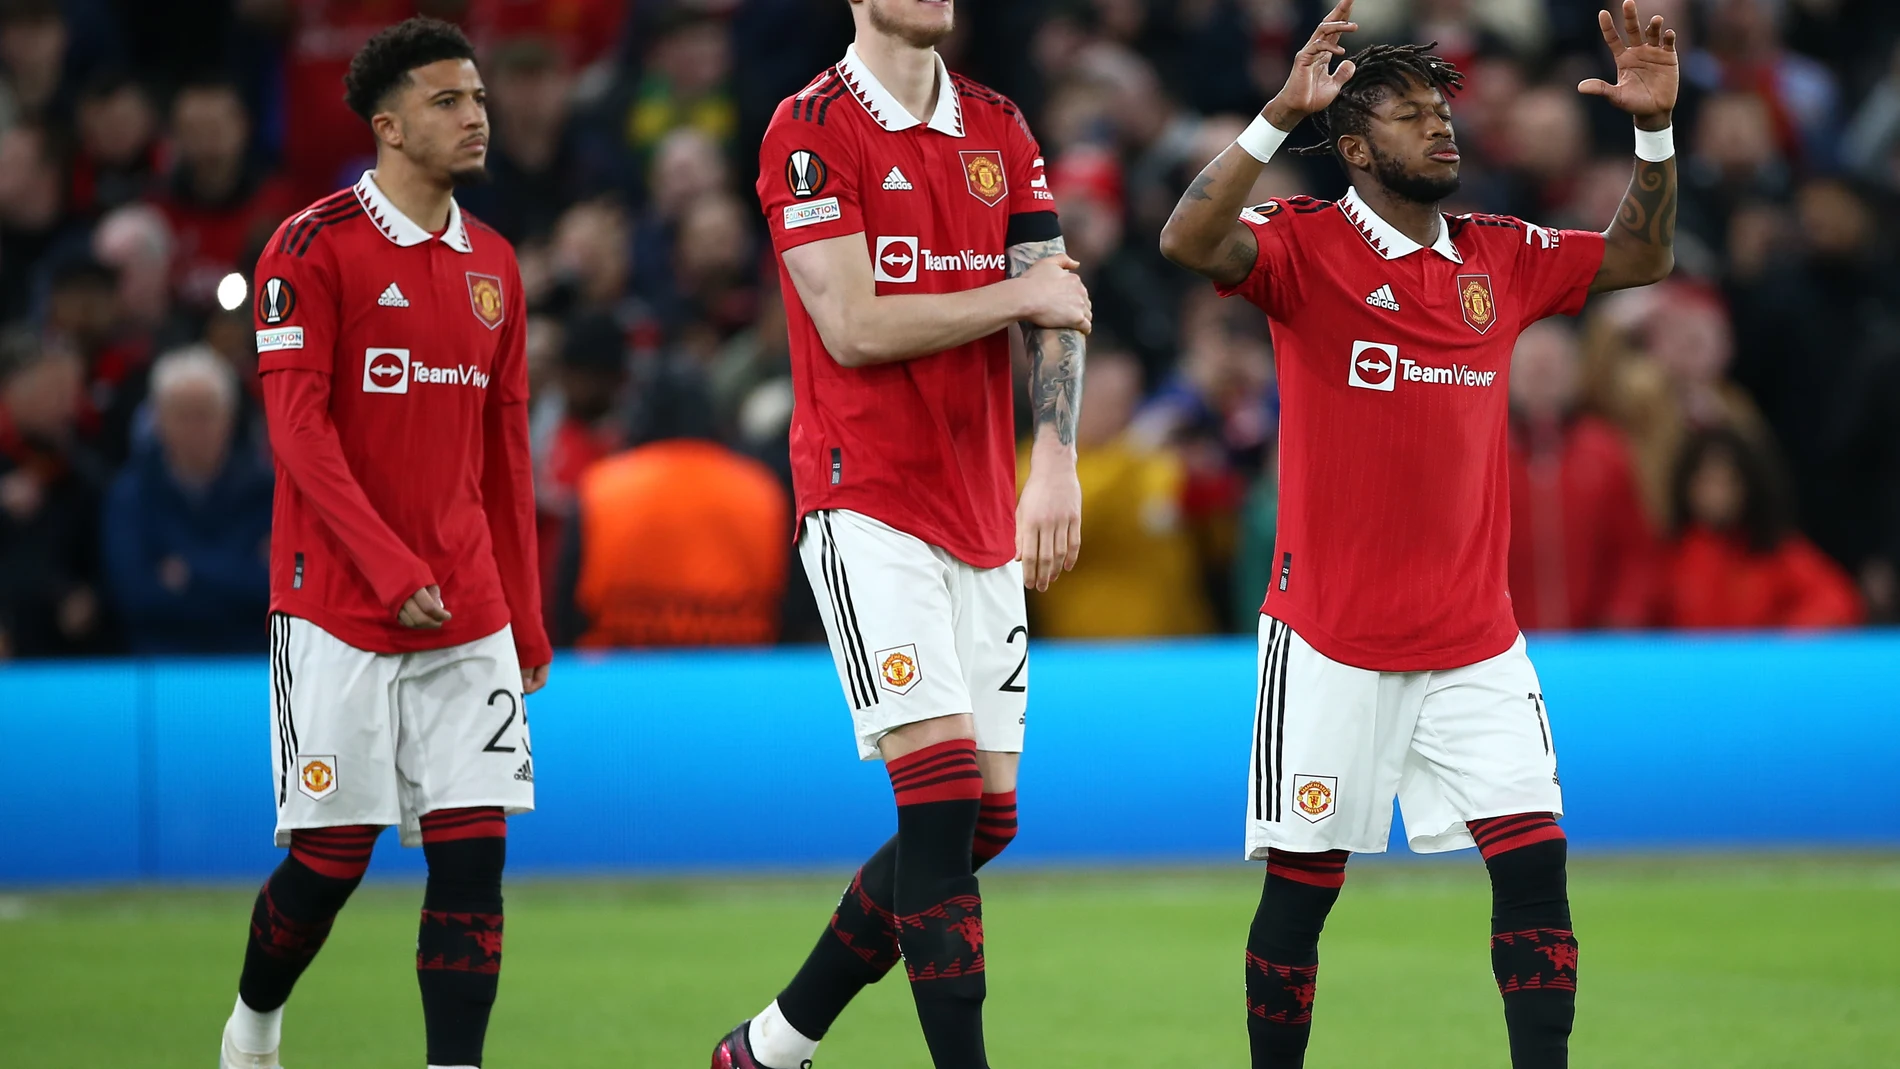 Manchester (United Kingdom), 23/02/2023.- Jadon Sancho (L), Wout Weghorst (C) and Fred (R) of Manchester United walk onto the pitch ahead of the UEFA Europa League play-off, 2nd leg match between Manchester United and FC Barcelona in Manchester, Britain, 23 February 2023. Manchester United won 2-1 and knocked Barcelona out of the competition. (Reino Unido) EFE/EPA/Adam Vaughan 